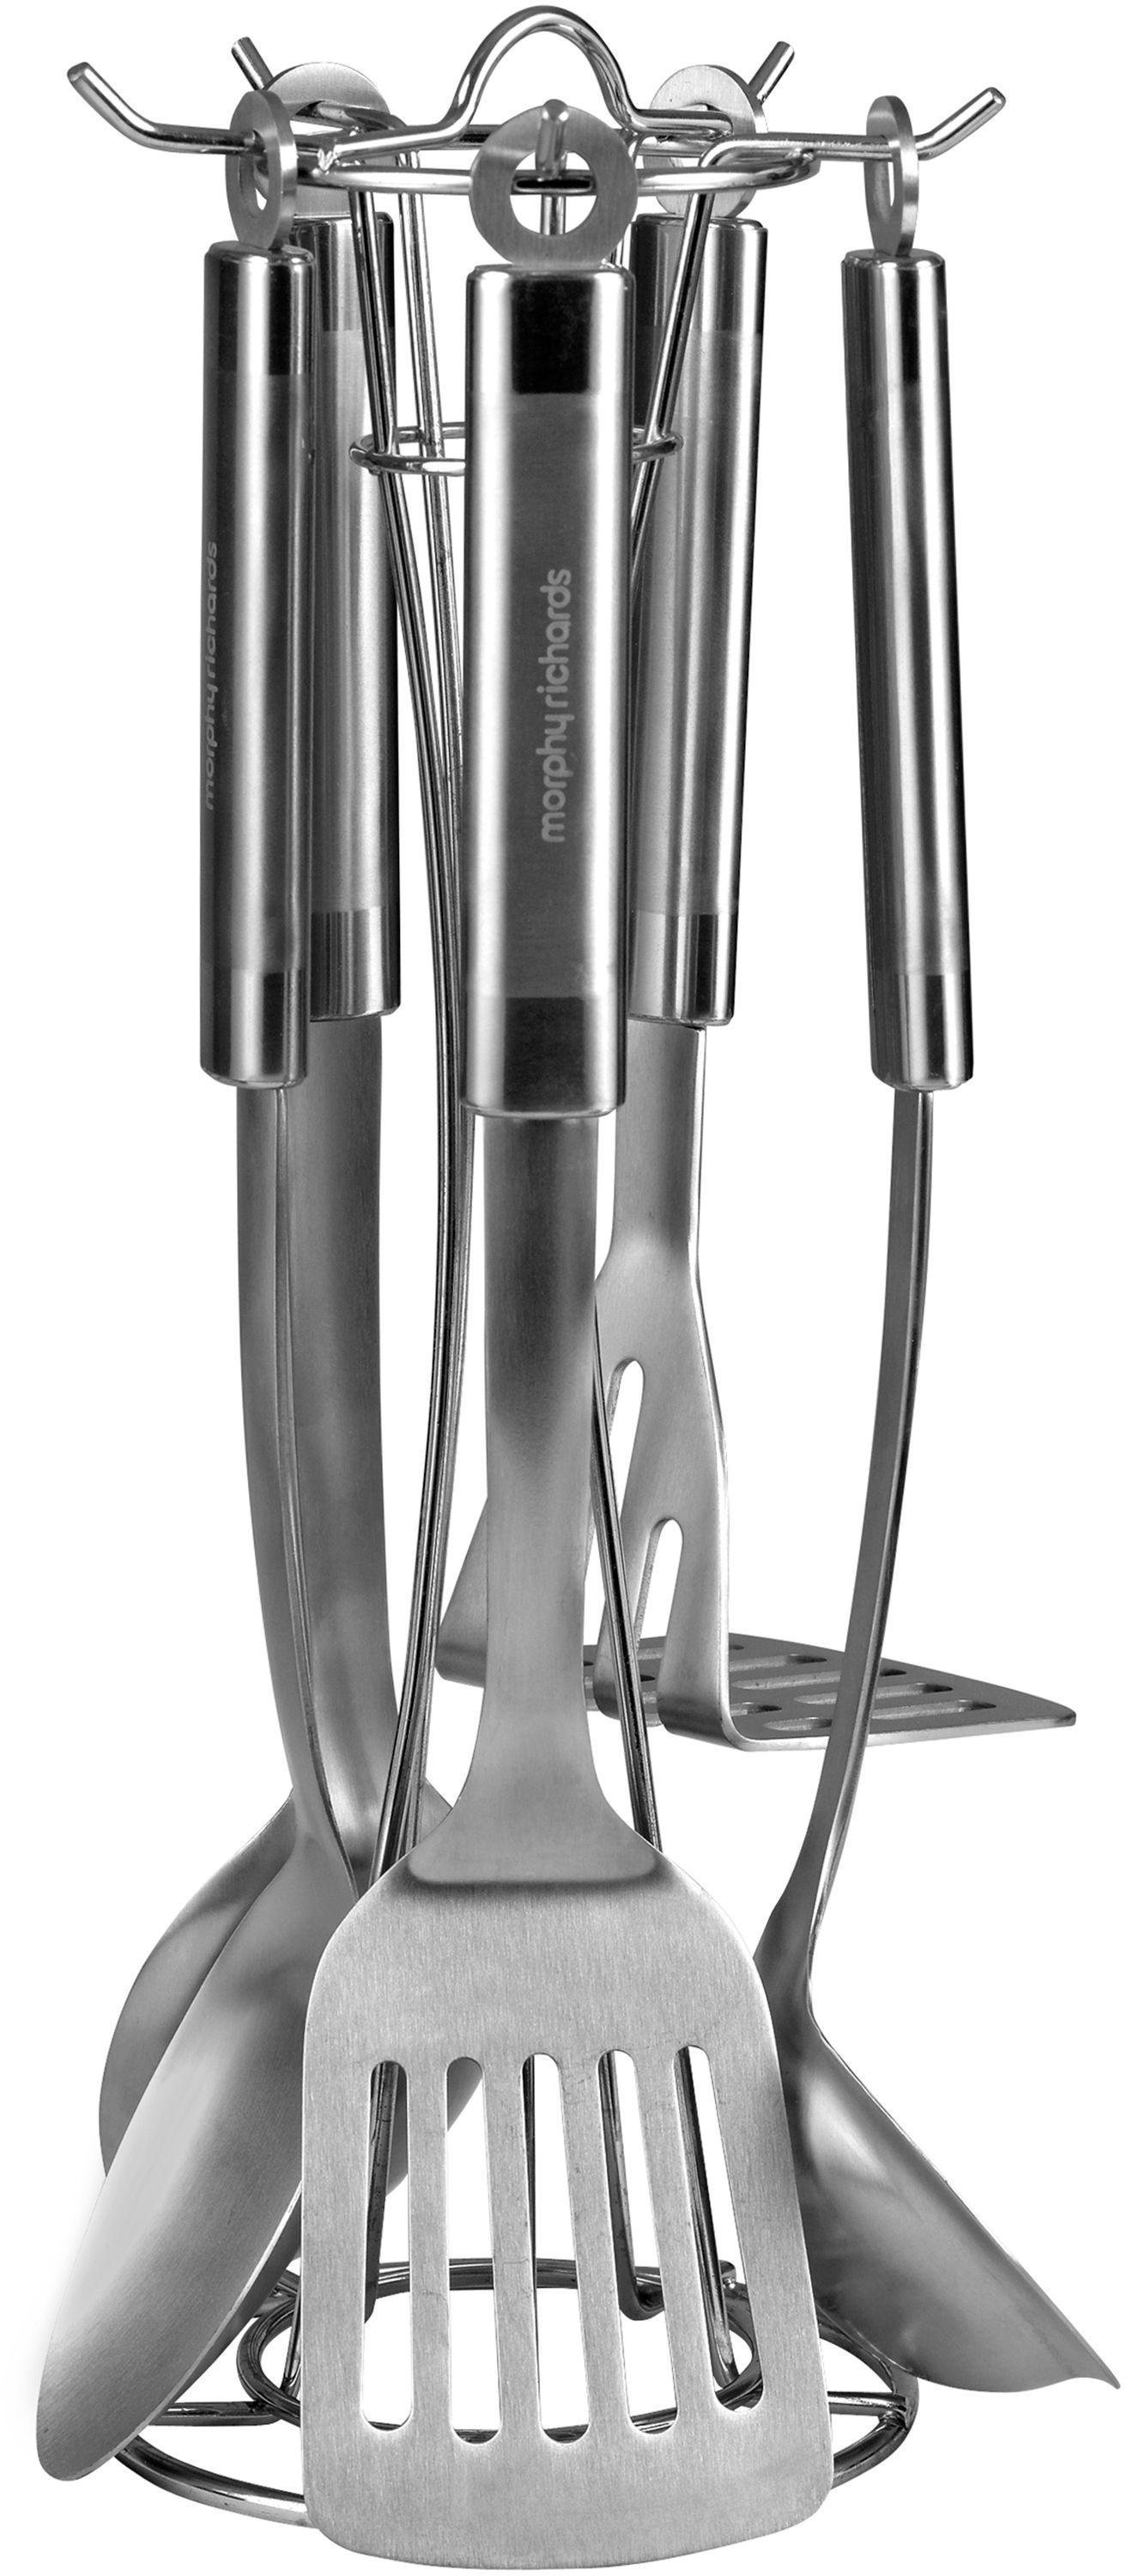 Morphy Richards Accents 5 Piece Tool Set - Stainless Steel.